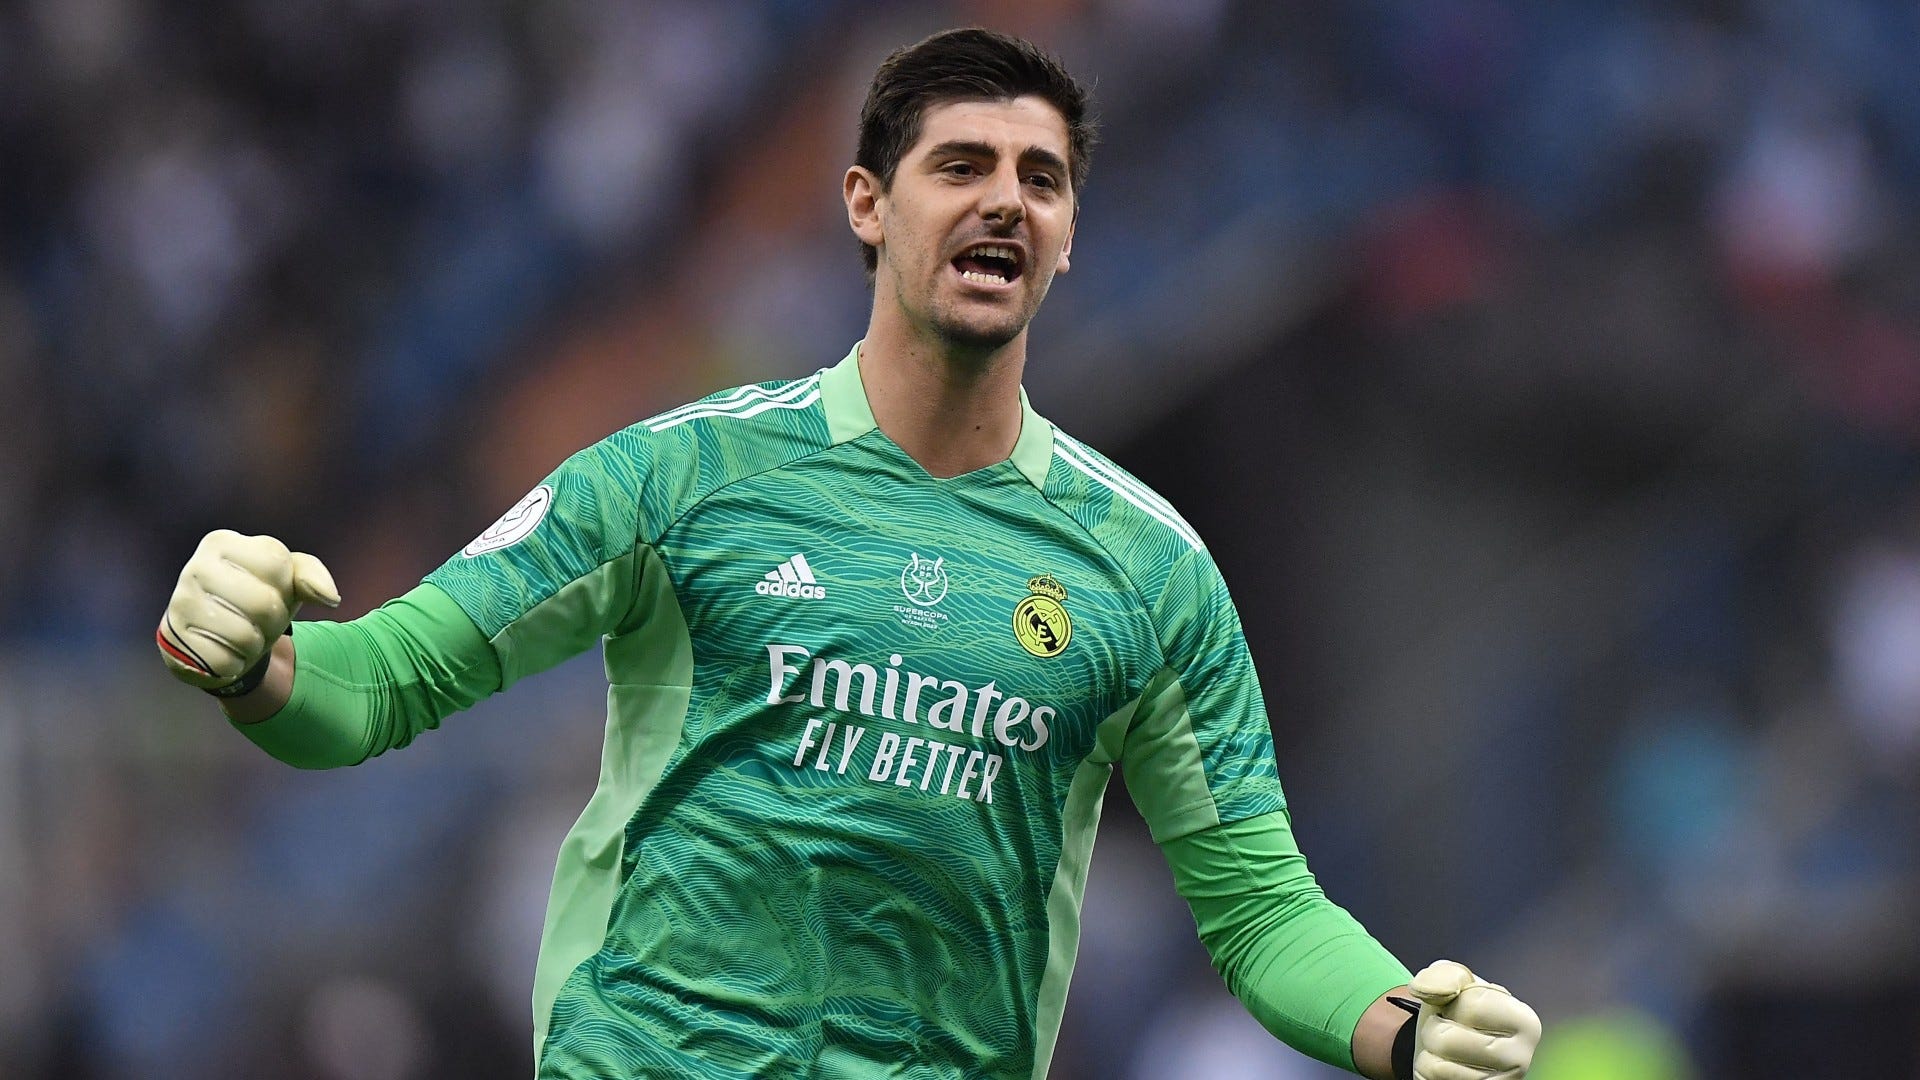 Chelsea 'struggling' compared to last year says Courtois with Real